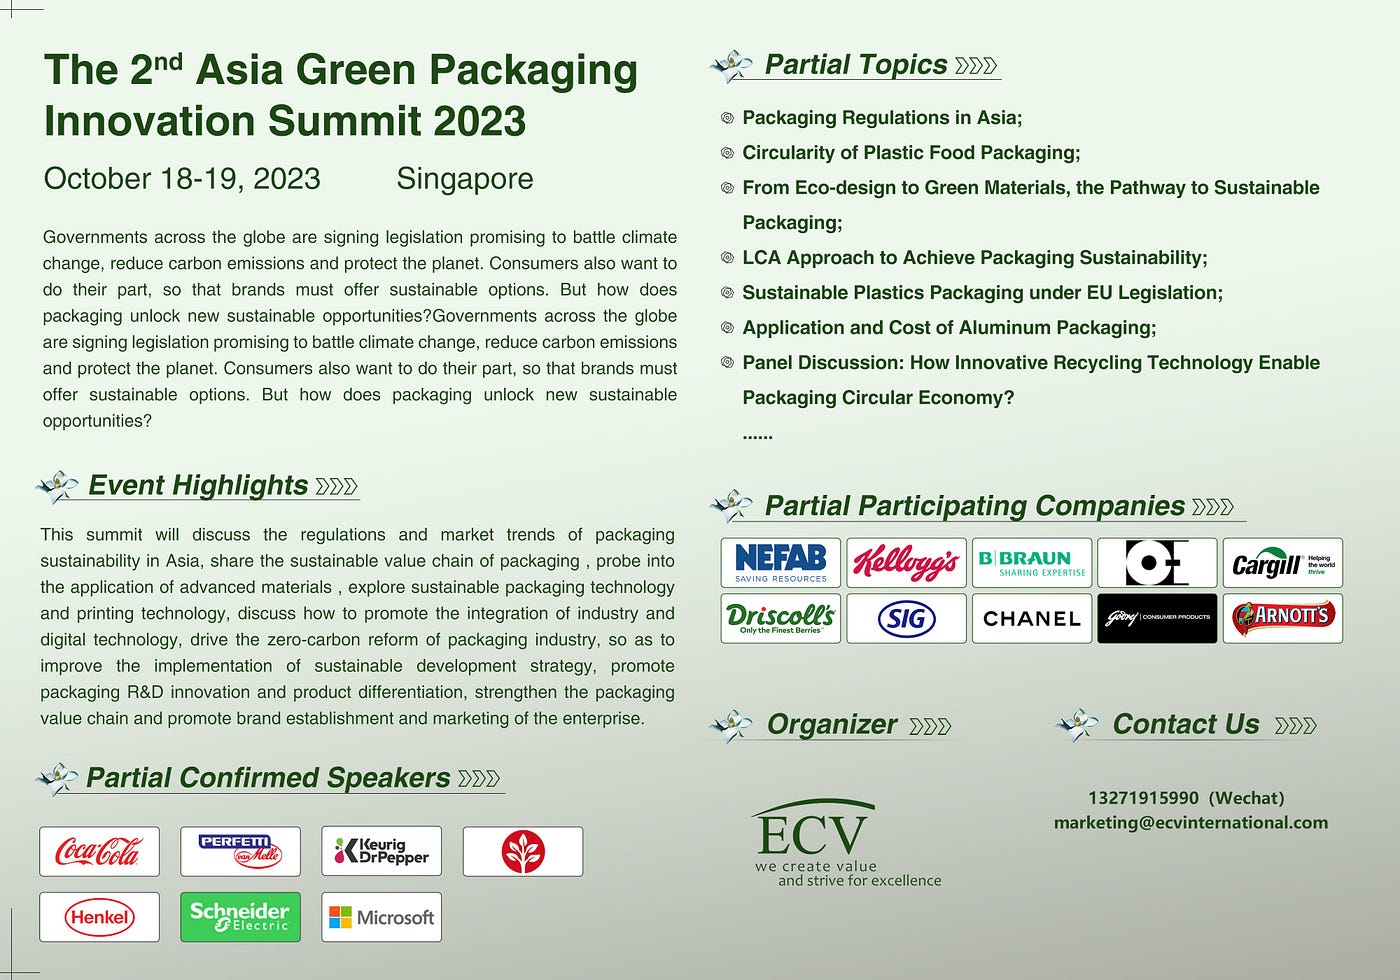 The 2nd Asia Green Packaging Innovation Summit 2023, by Ecvinternational